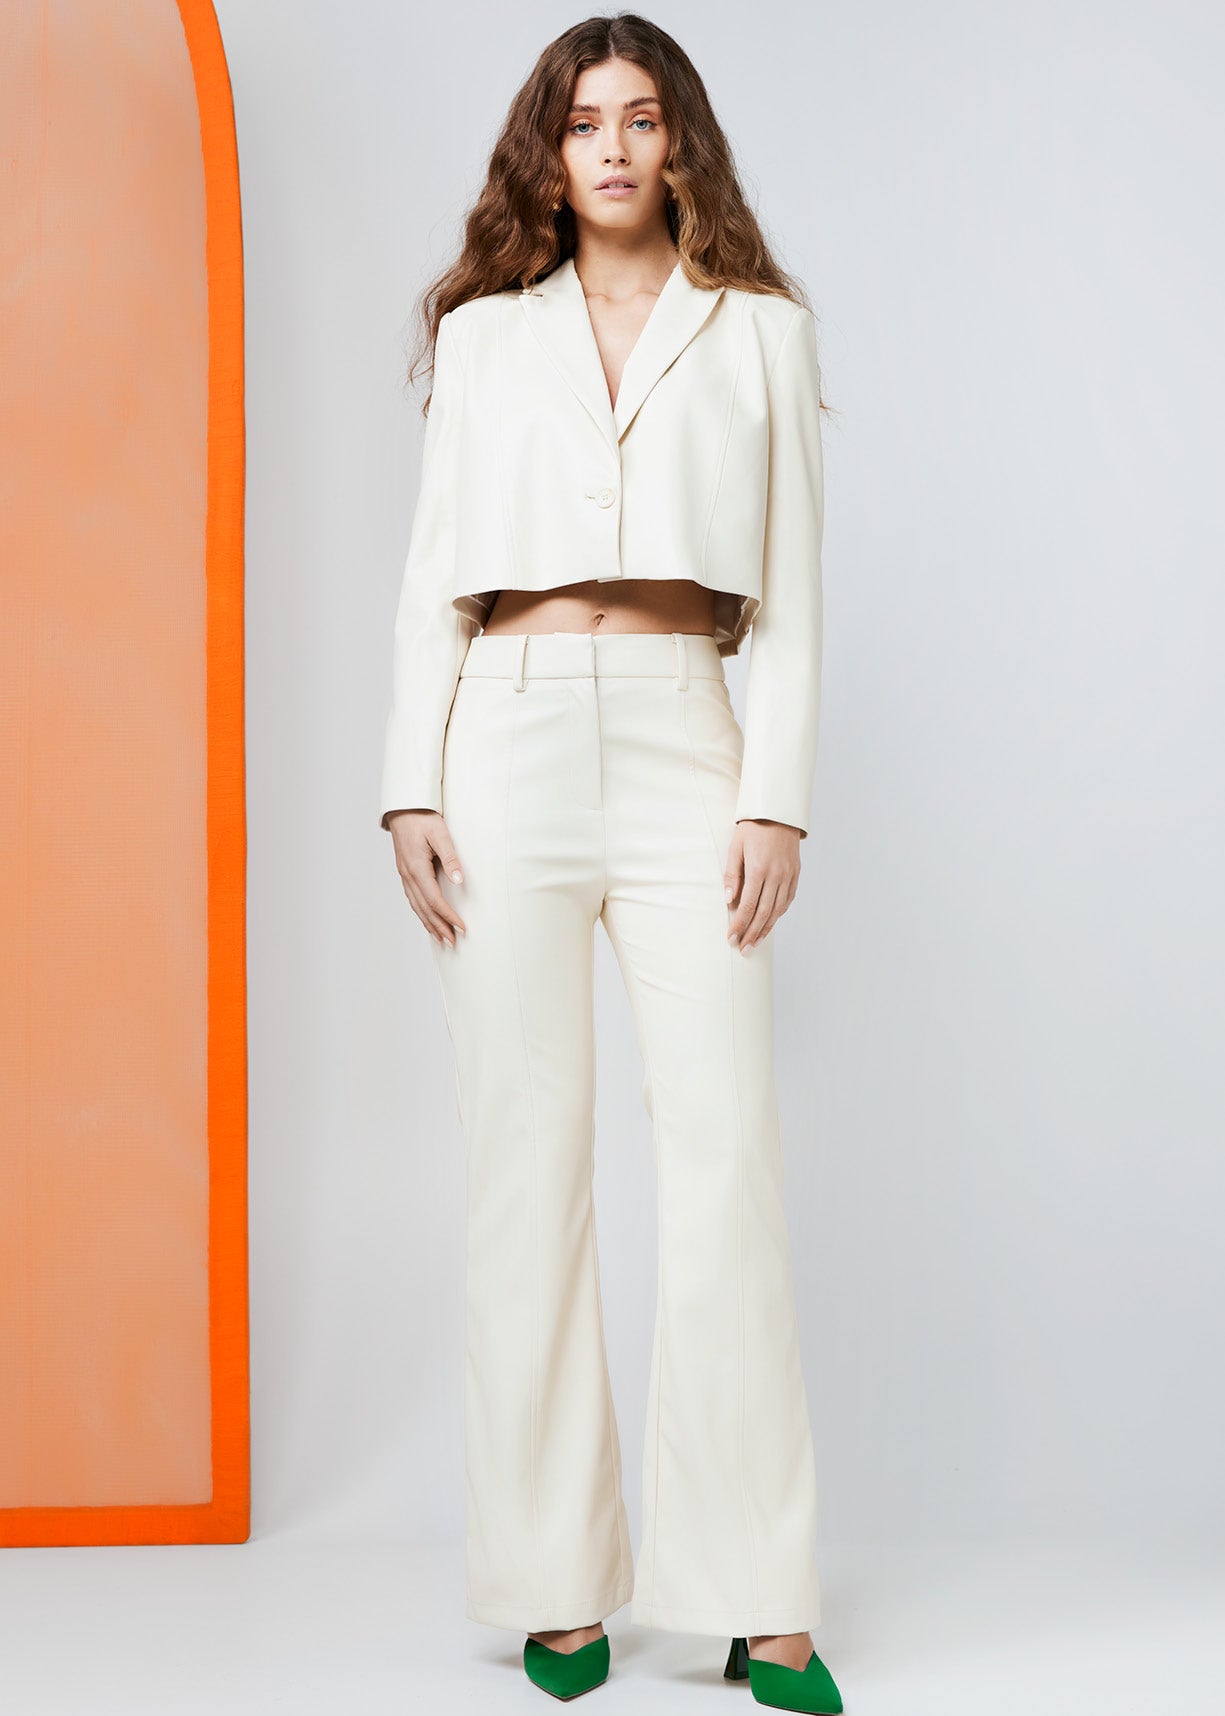 Jeanette Pu Pants Off White